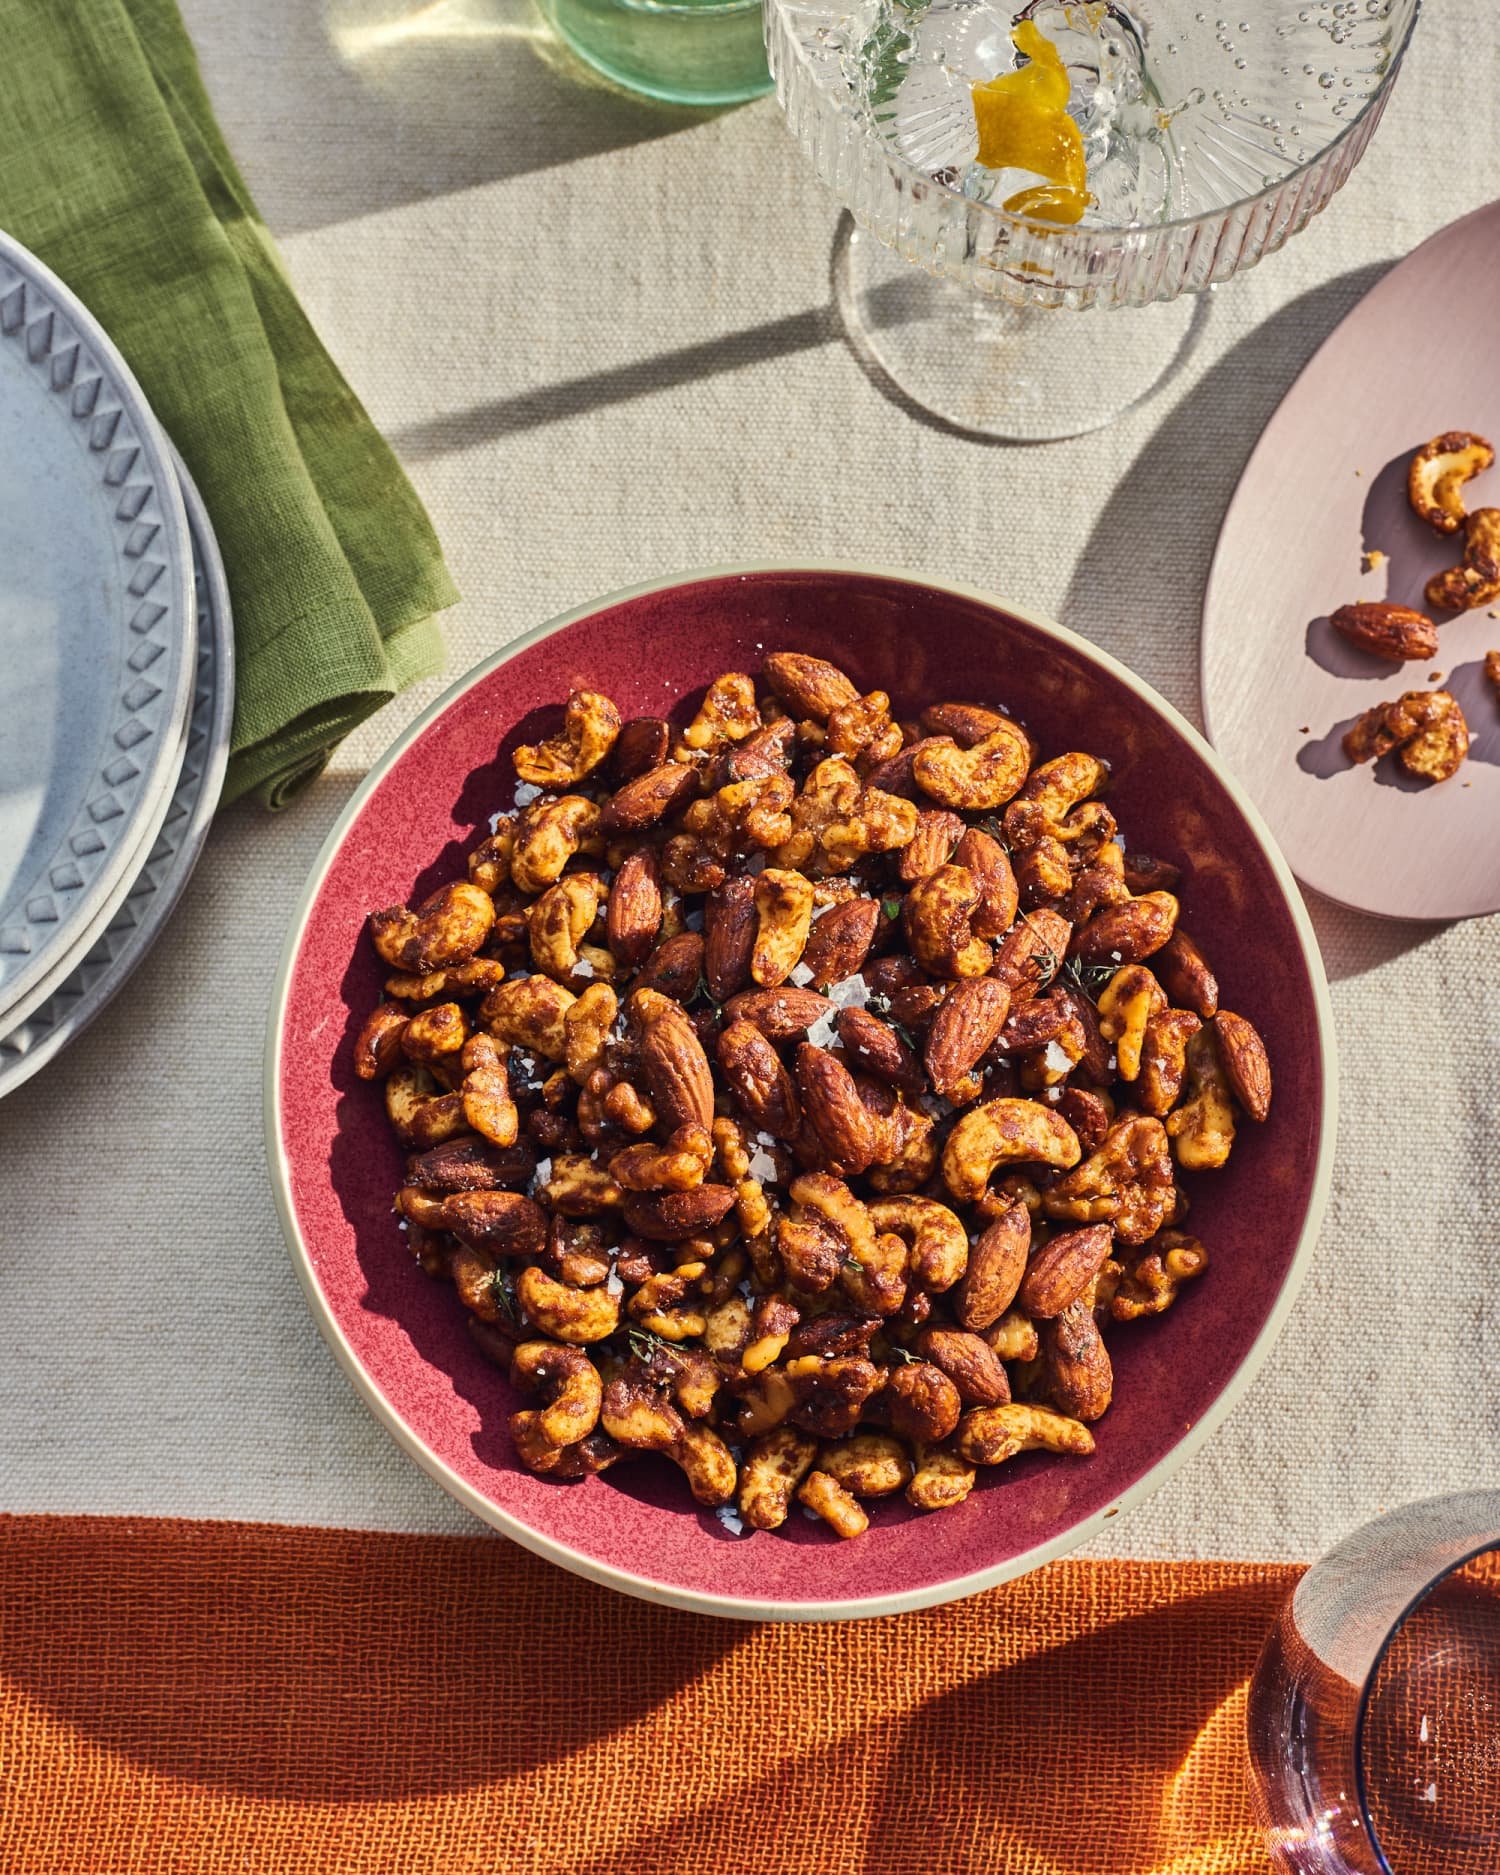 Dorie Greenspan’s Candied Cocktail Nuts